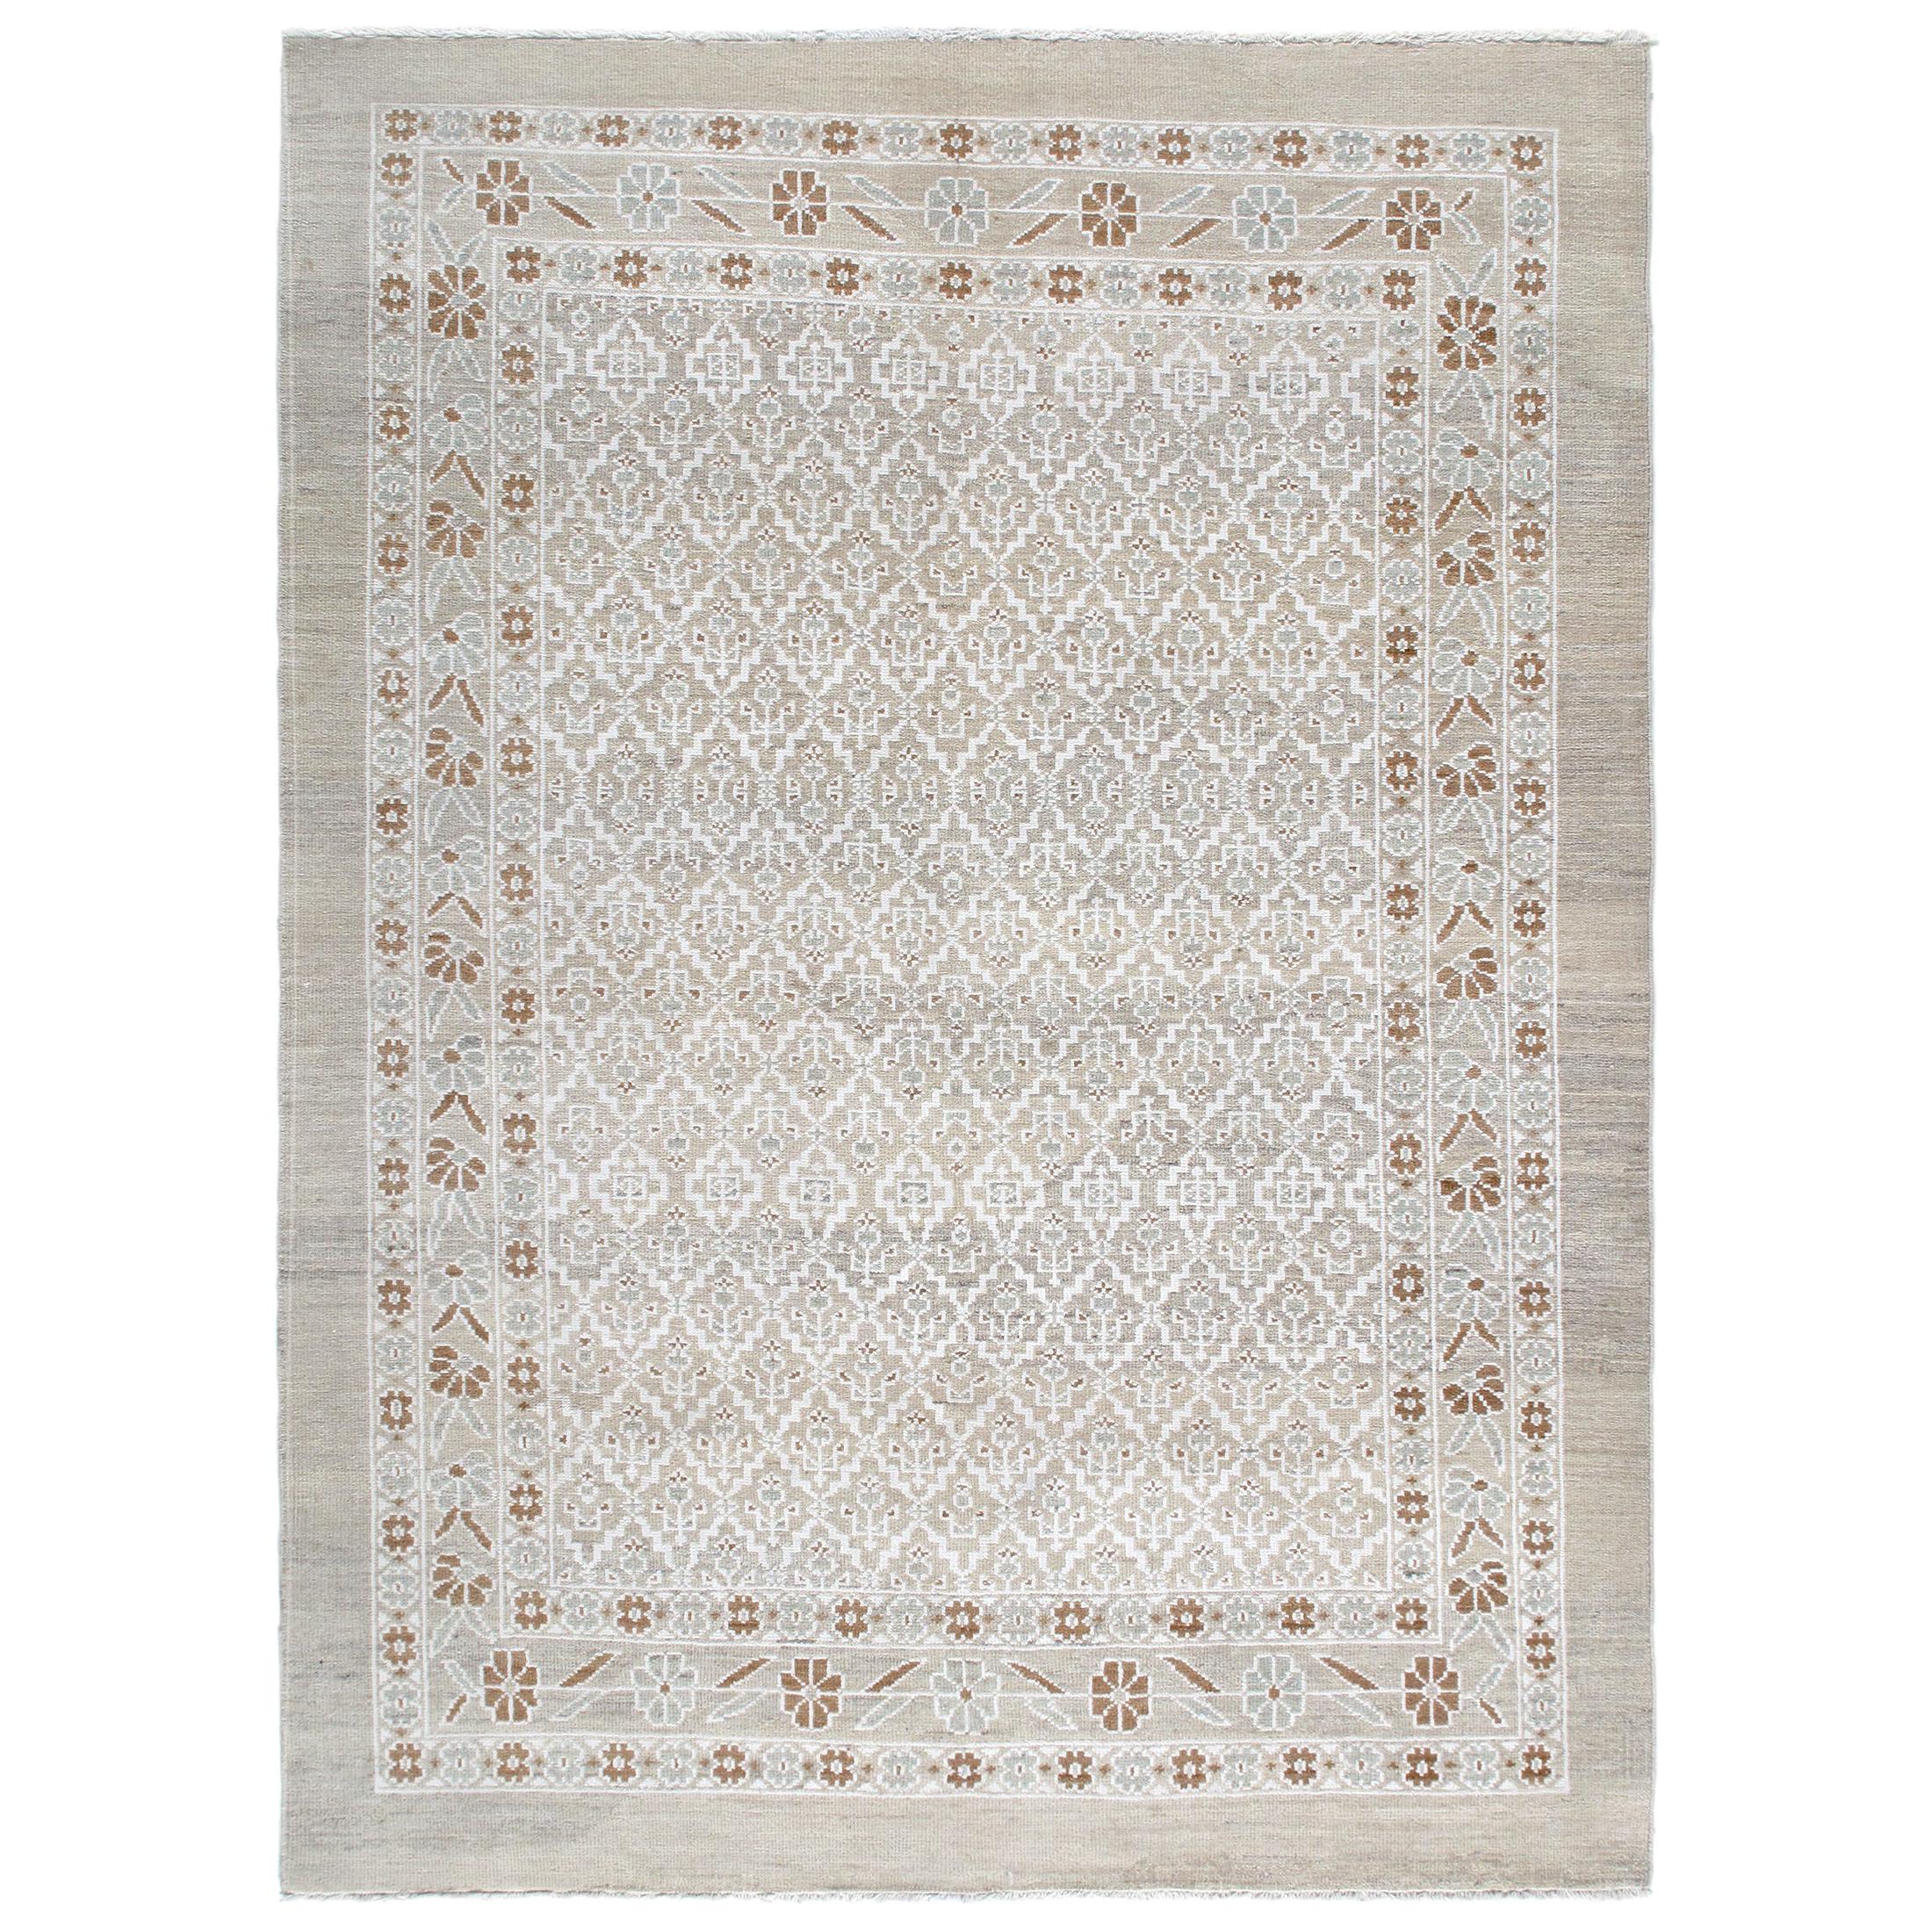 Persian Serab Decorative Hand Knotted Rug in Camel and Beige Color